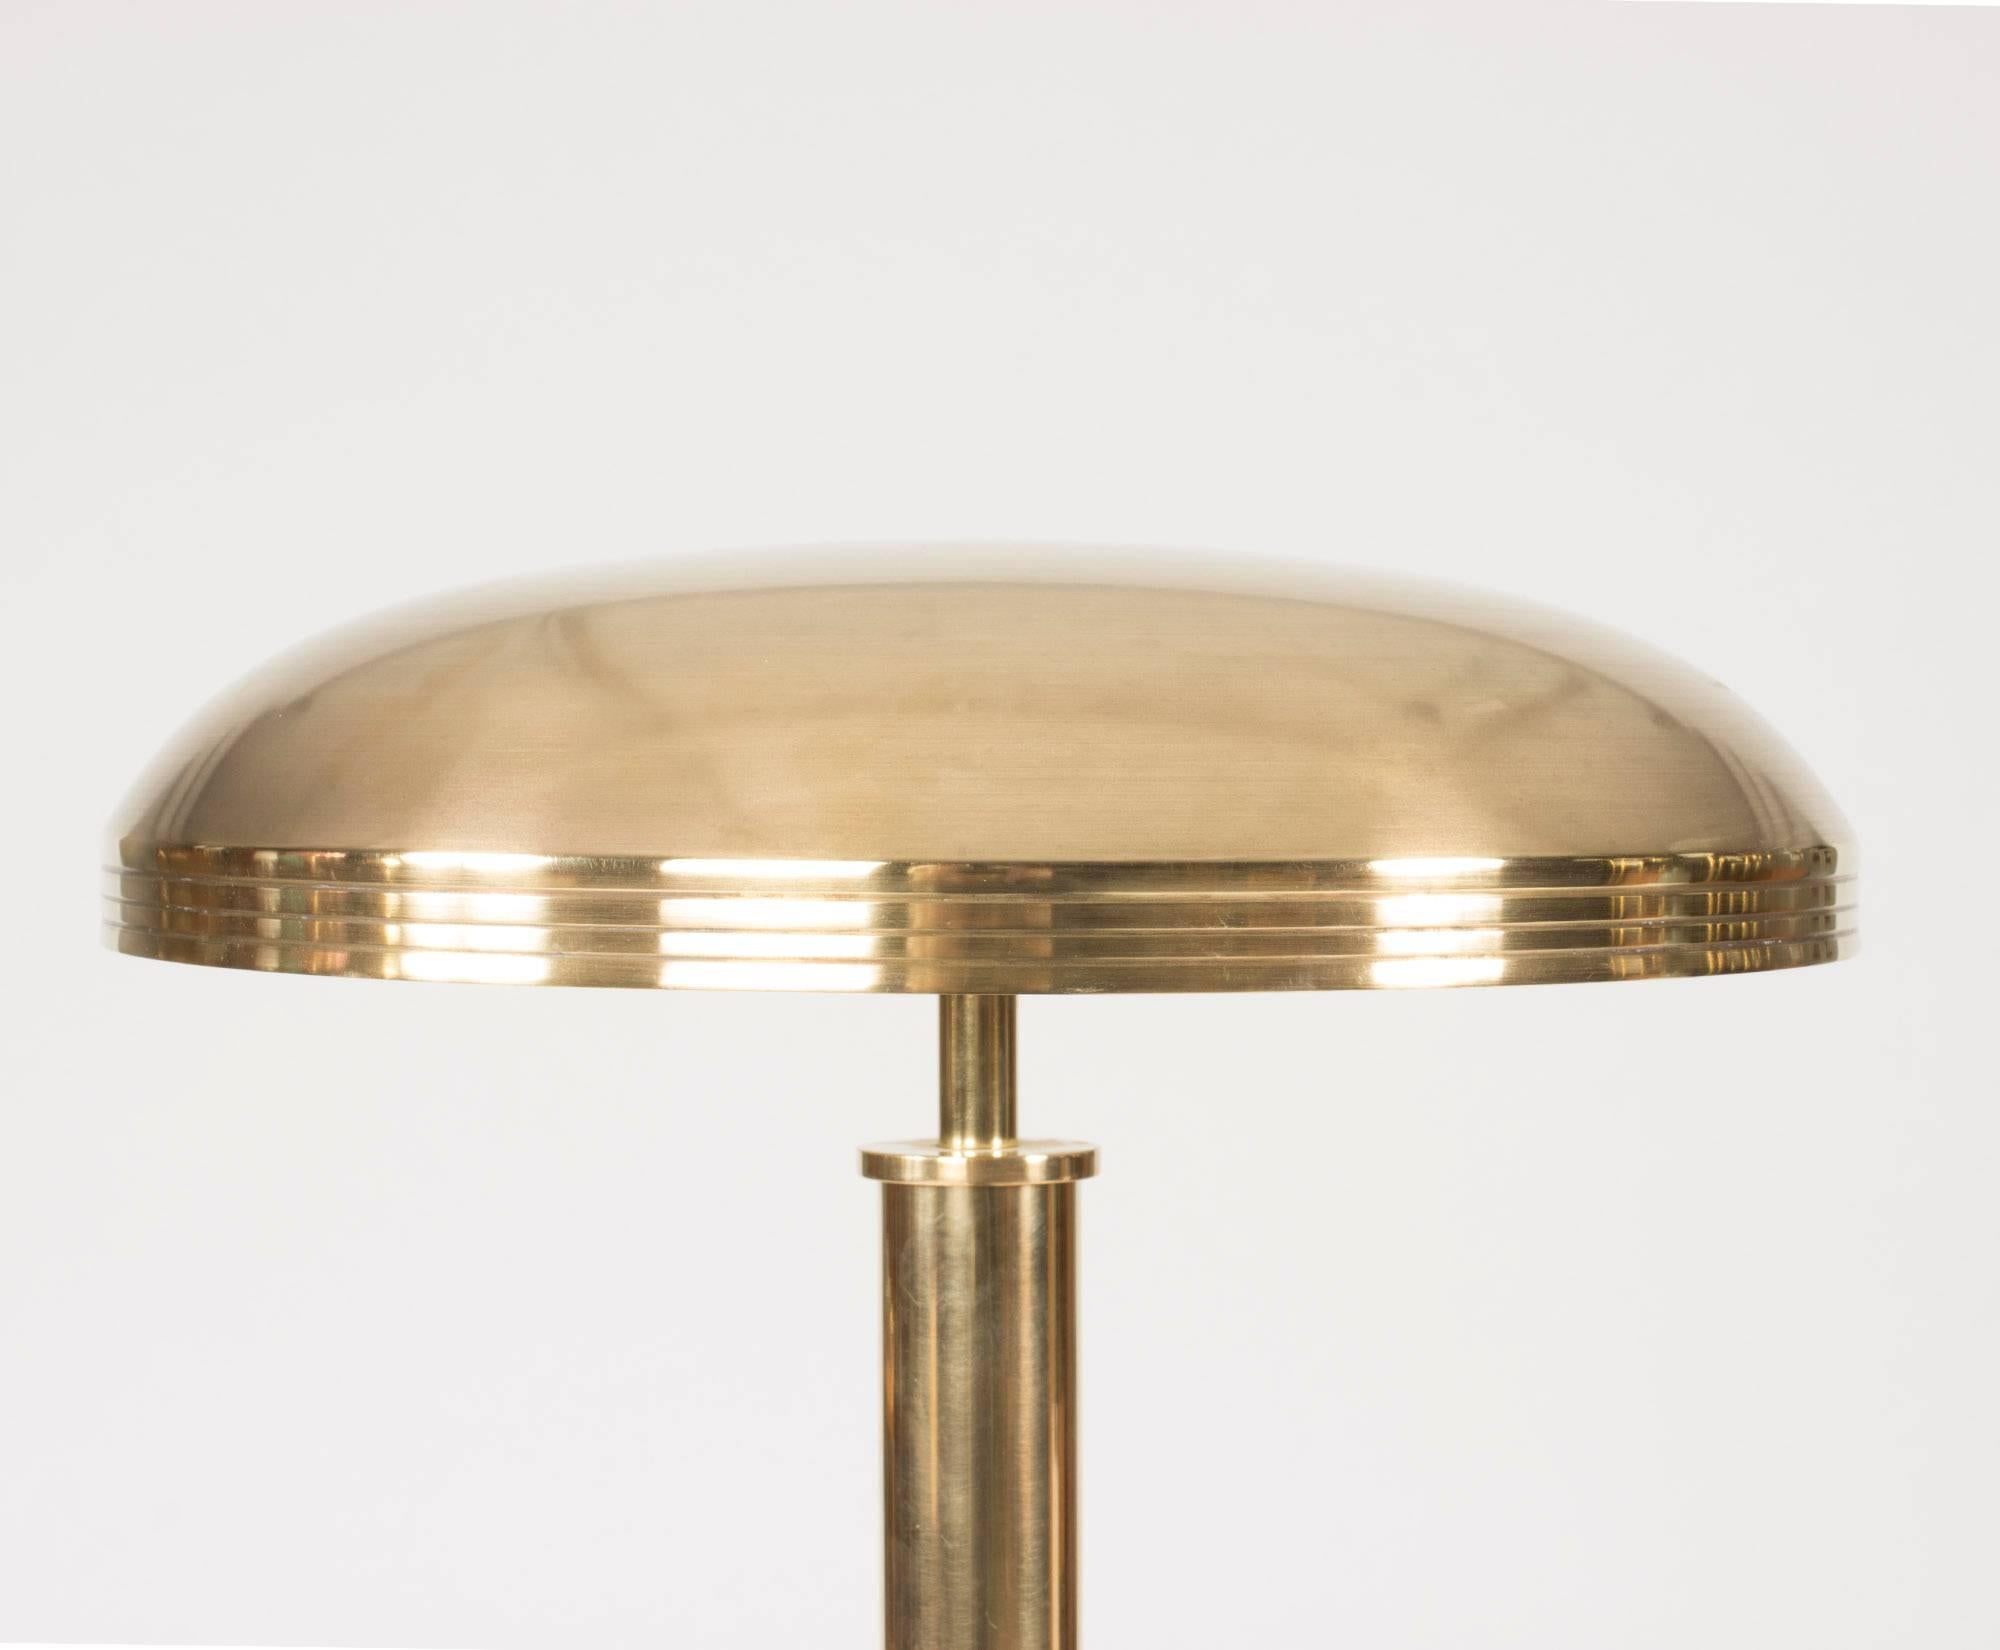 Luxurious brass table lamp from Böhlmarks. Brass shade and handle with a engraved lines, mahogany base.